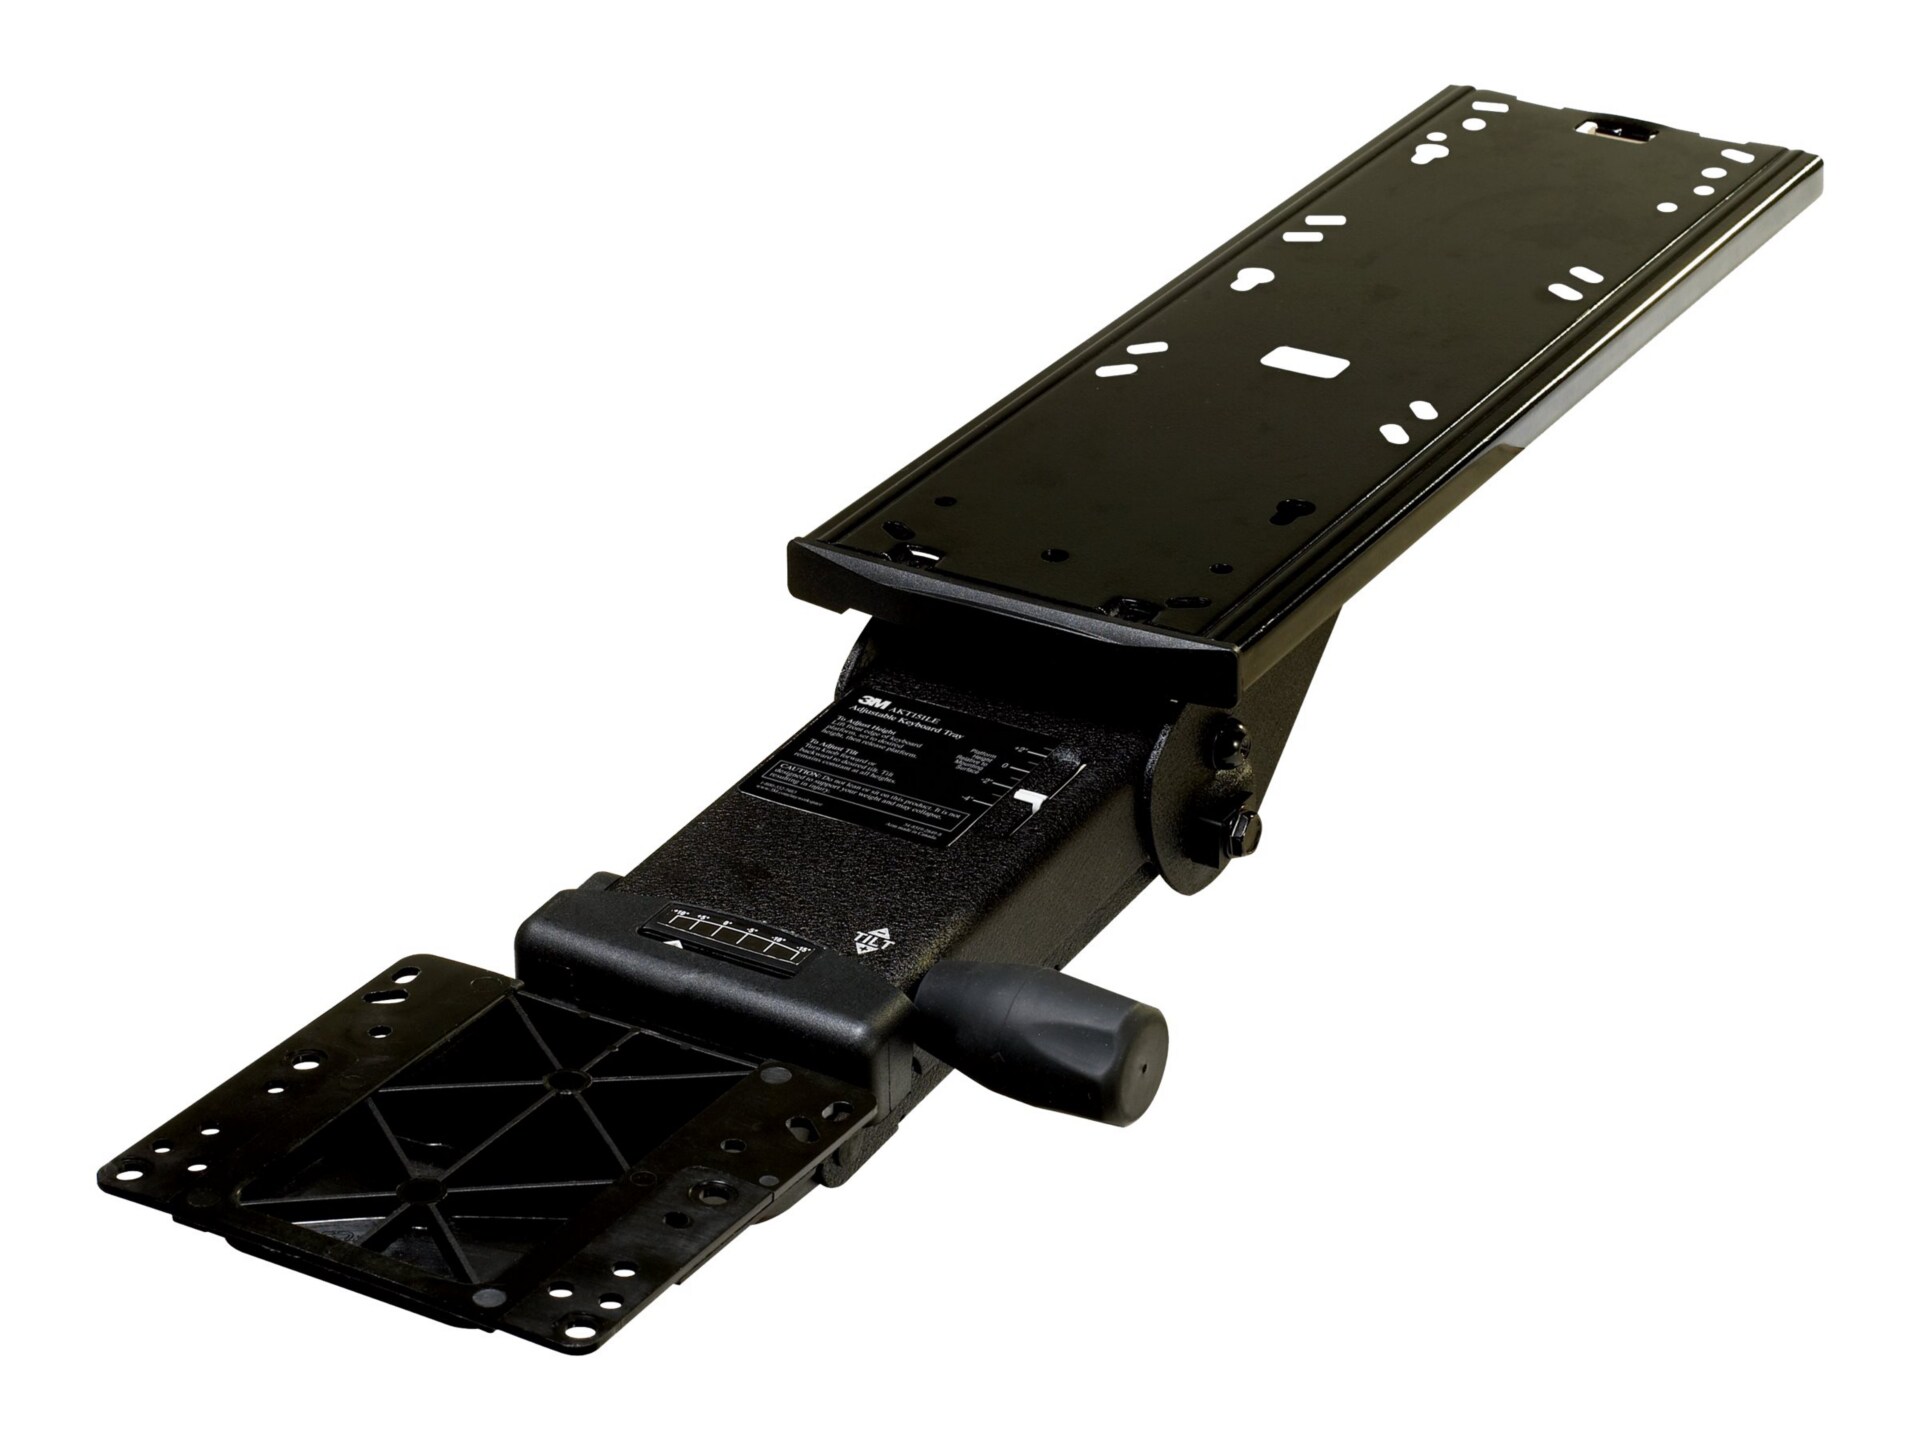 3M Adjustable Keyboard/Mouse Arm Mount Tray